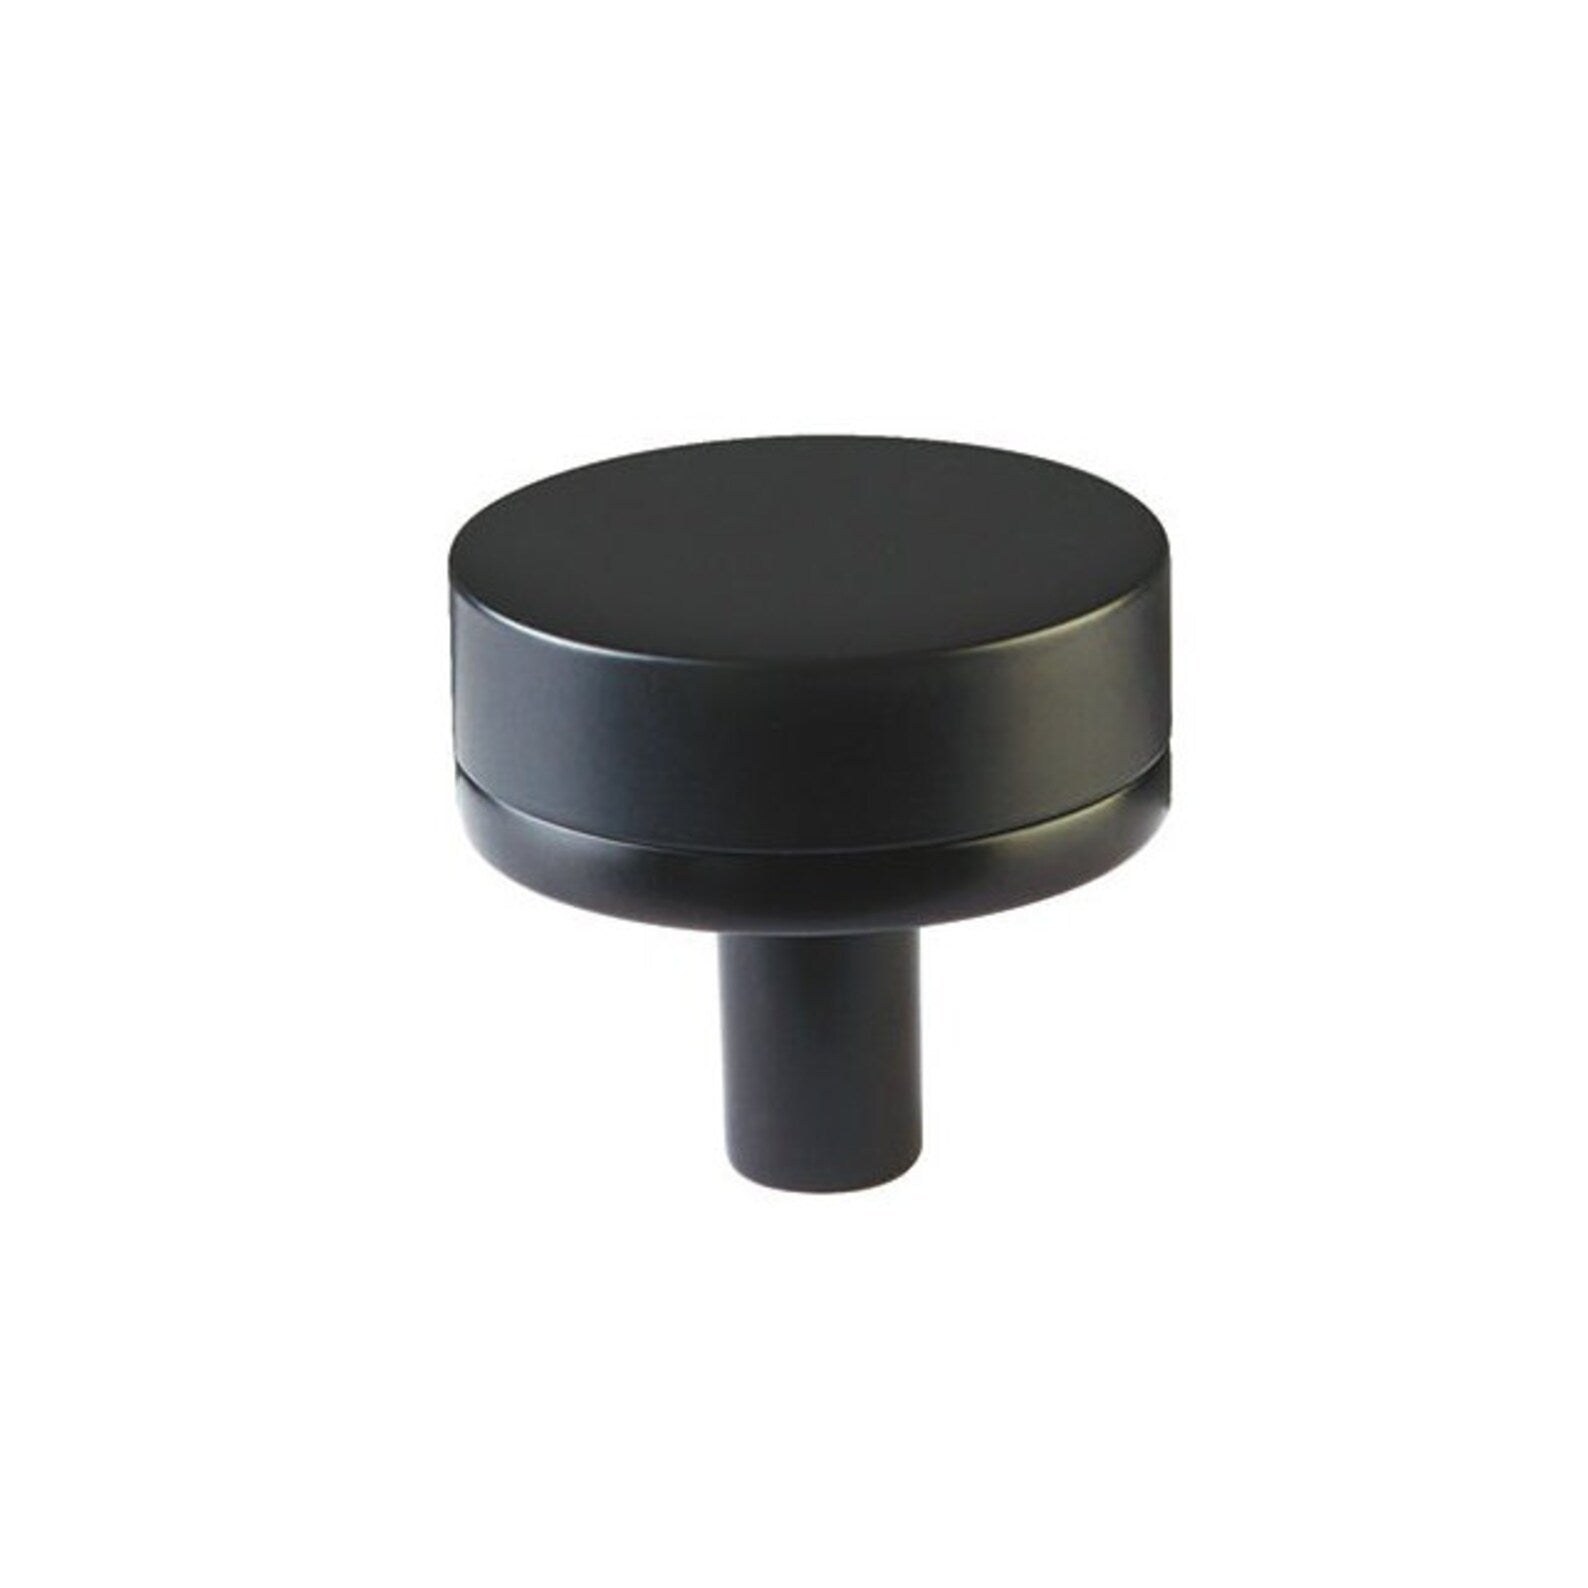 Smooth "Converse No.2" Matte Black Cabinet Knobs and Drawer Pulls